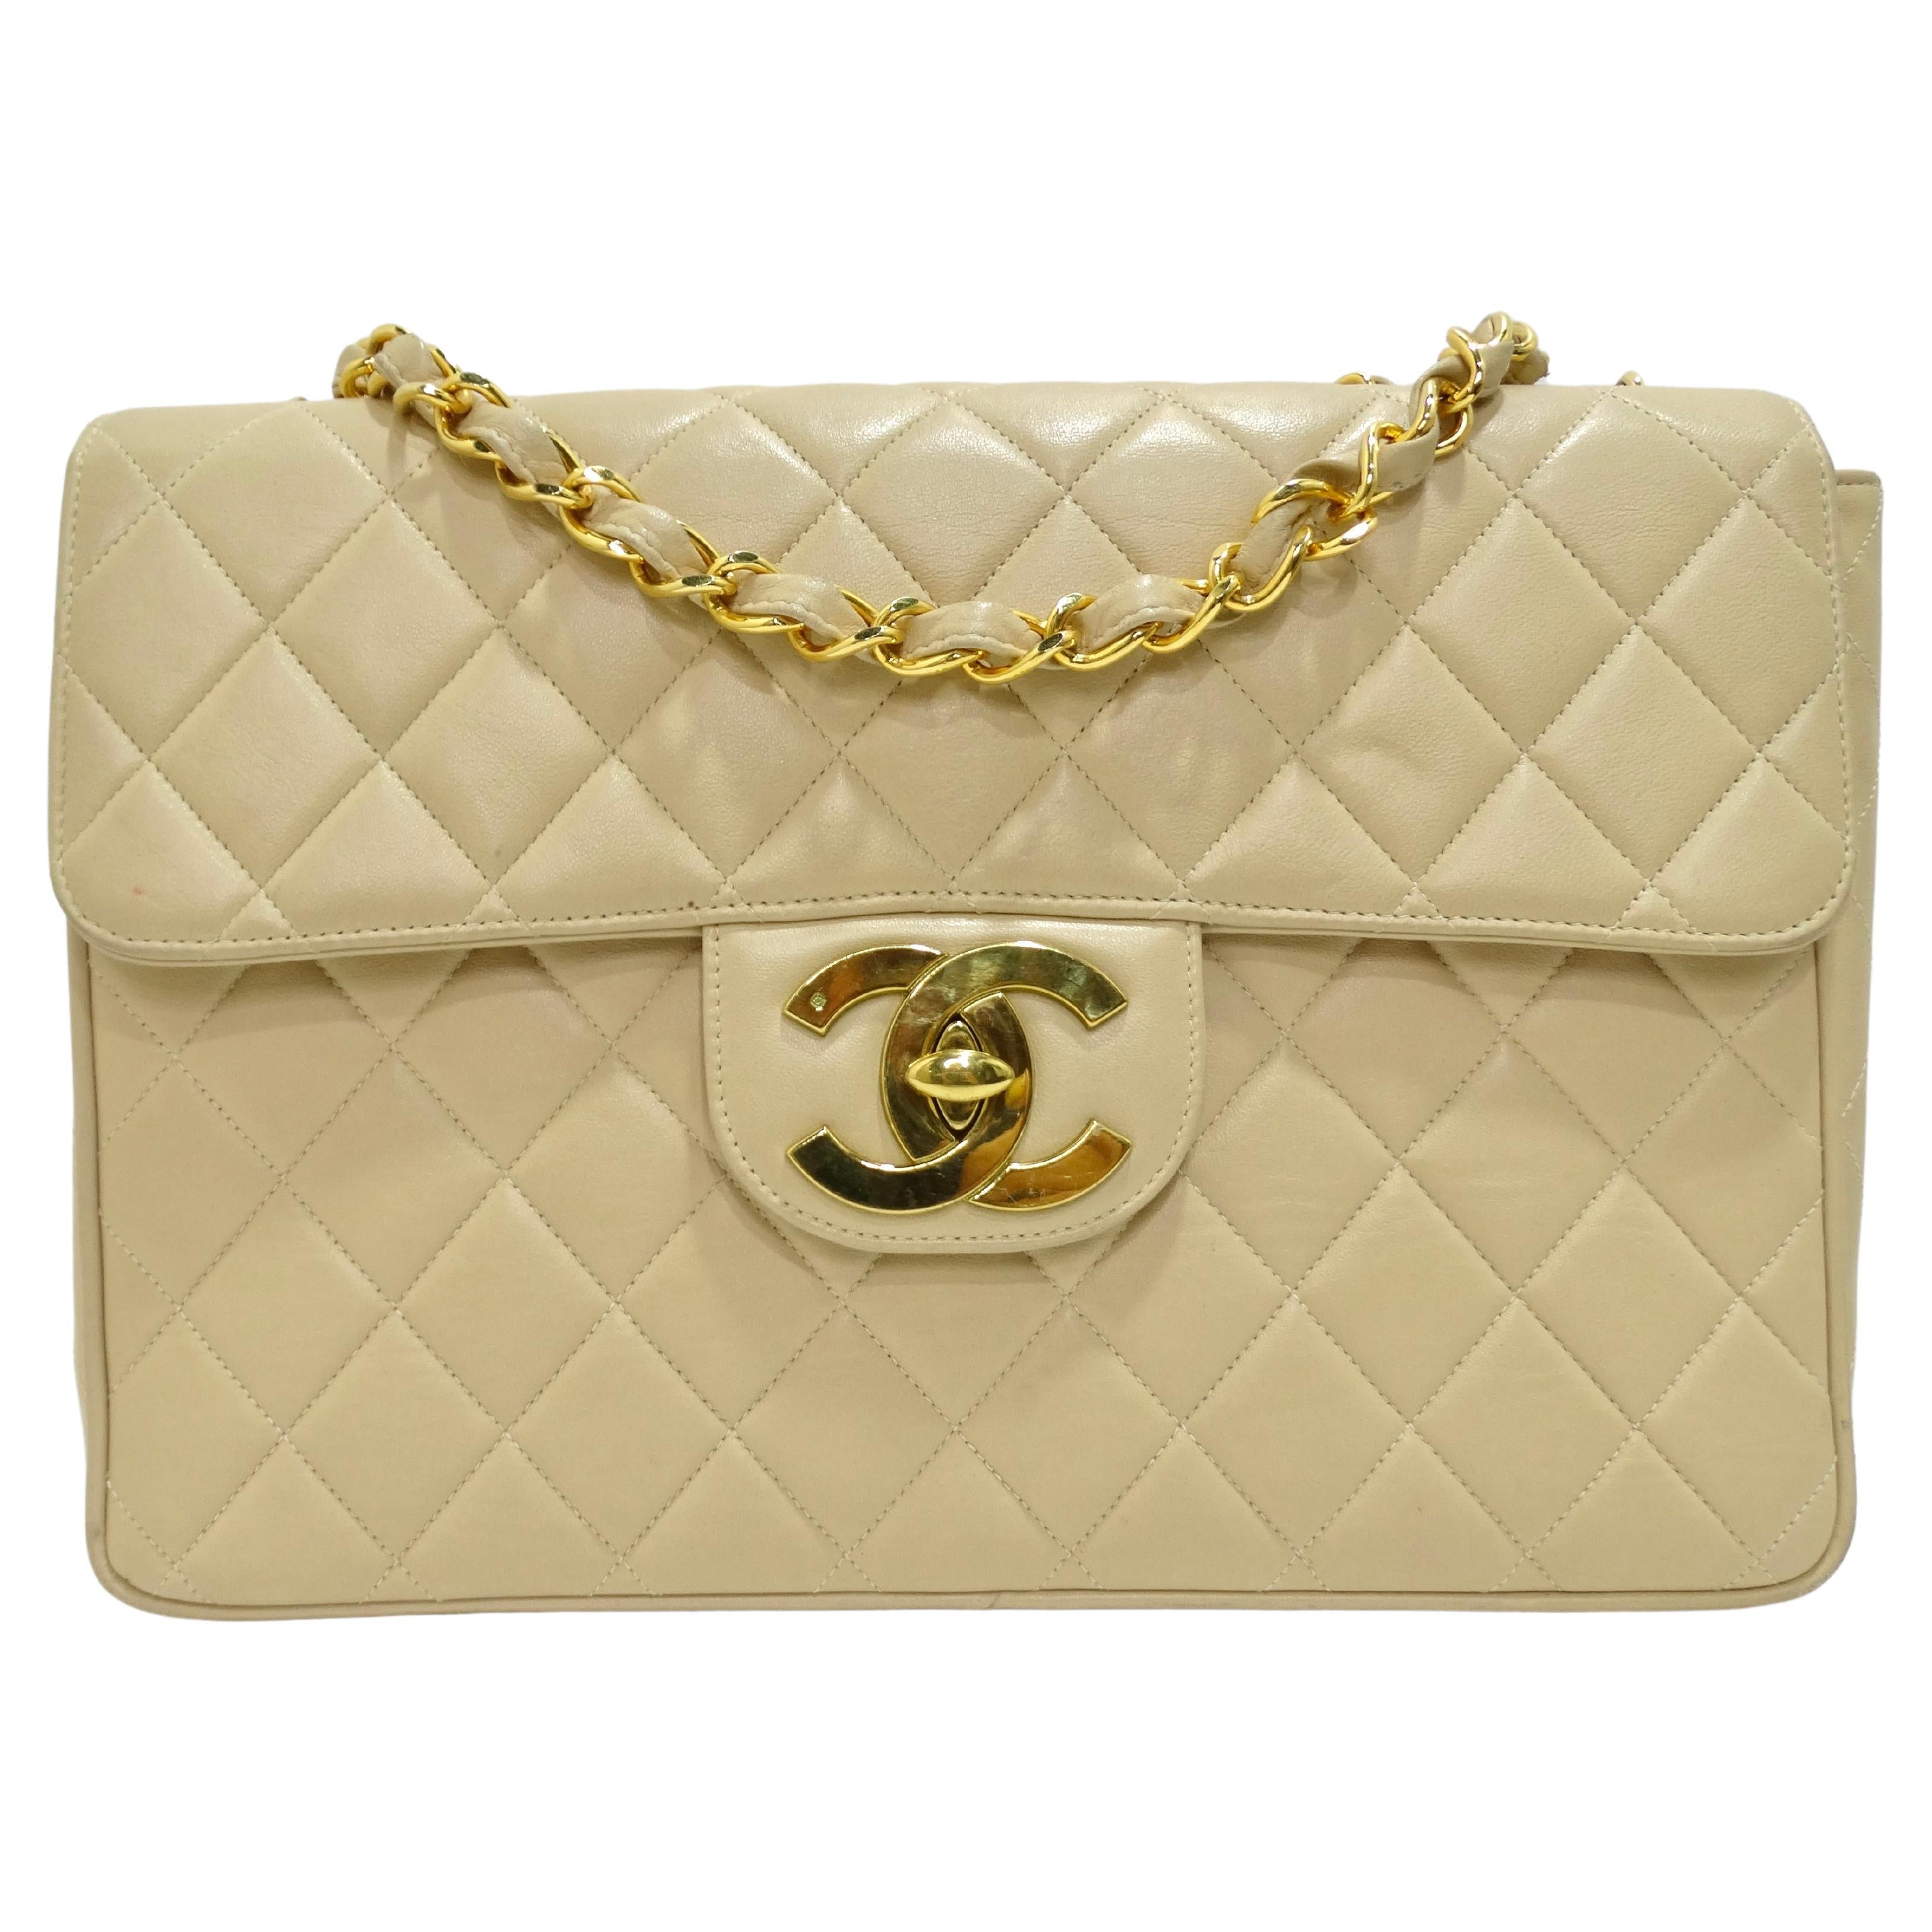 Chanel Beige Quilted Canvas Jumbo Vintage Flap Bag